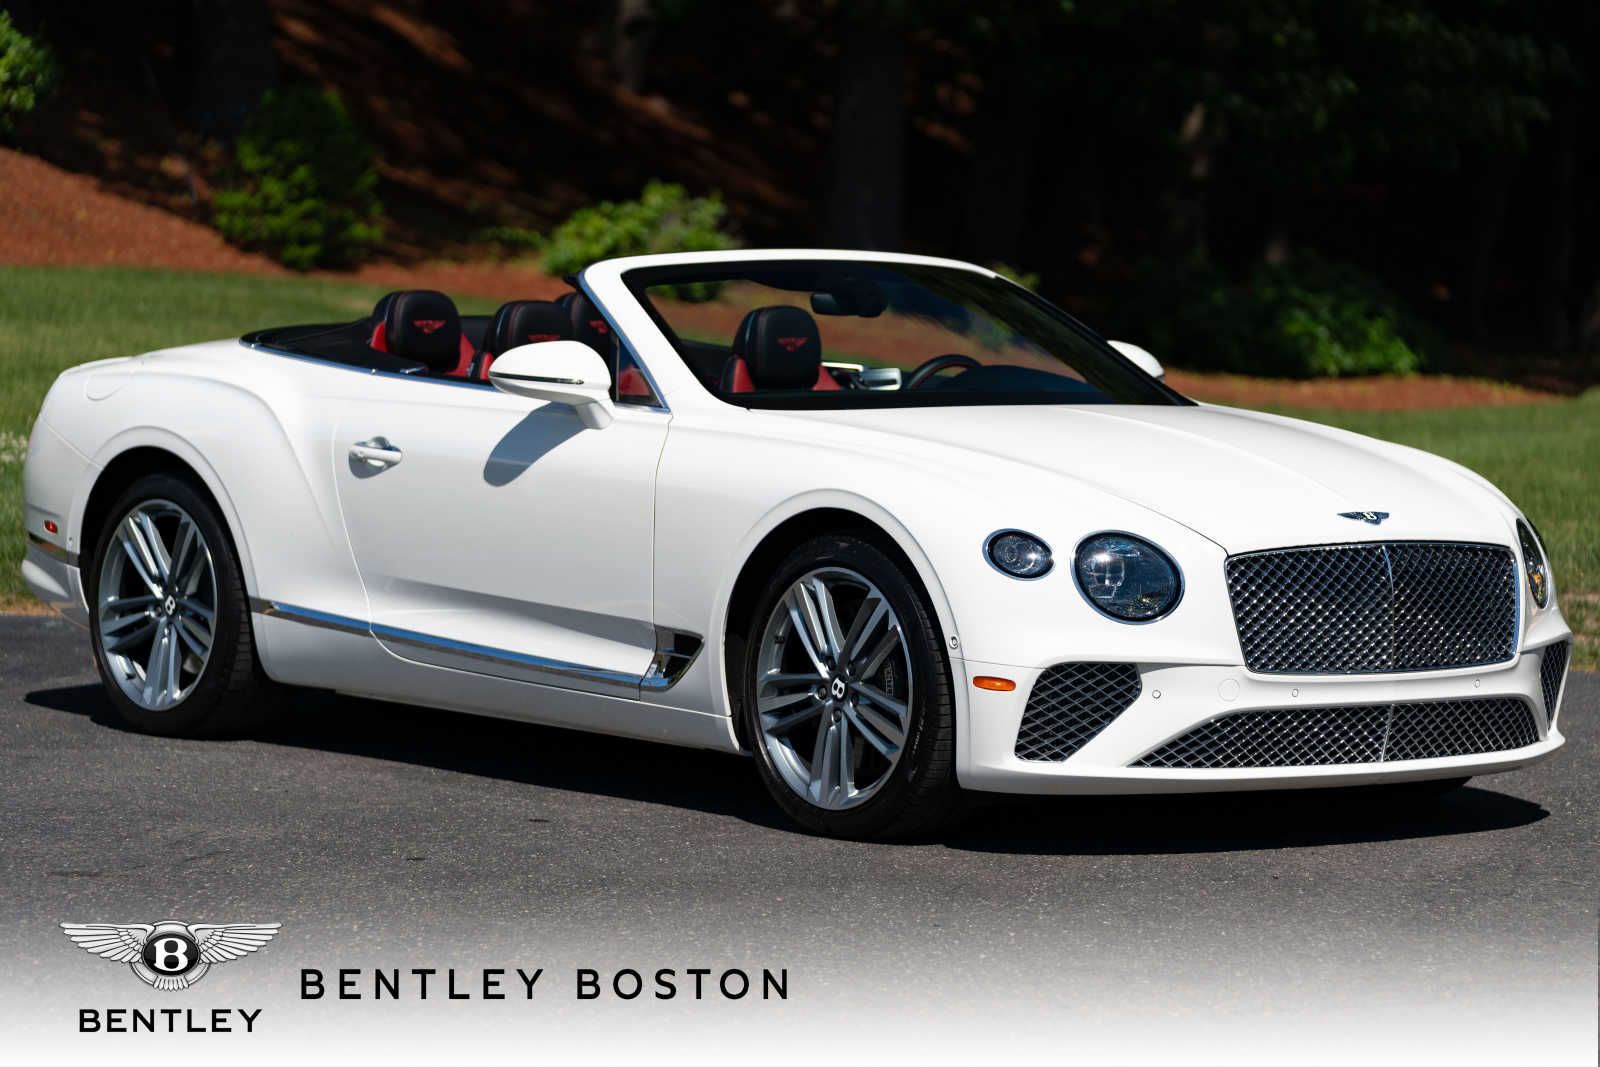 Certified Pre-Owned Bentley For Sale In Boston MA